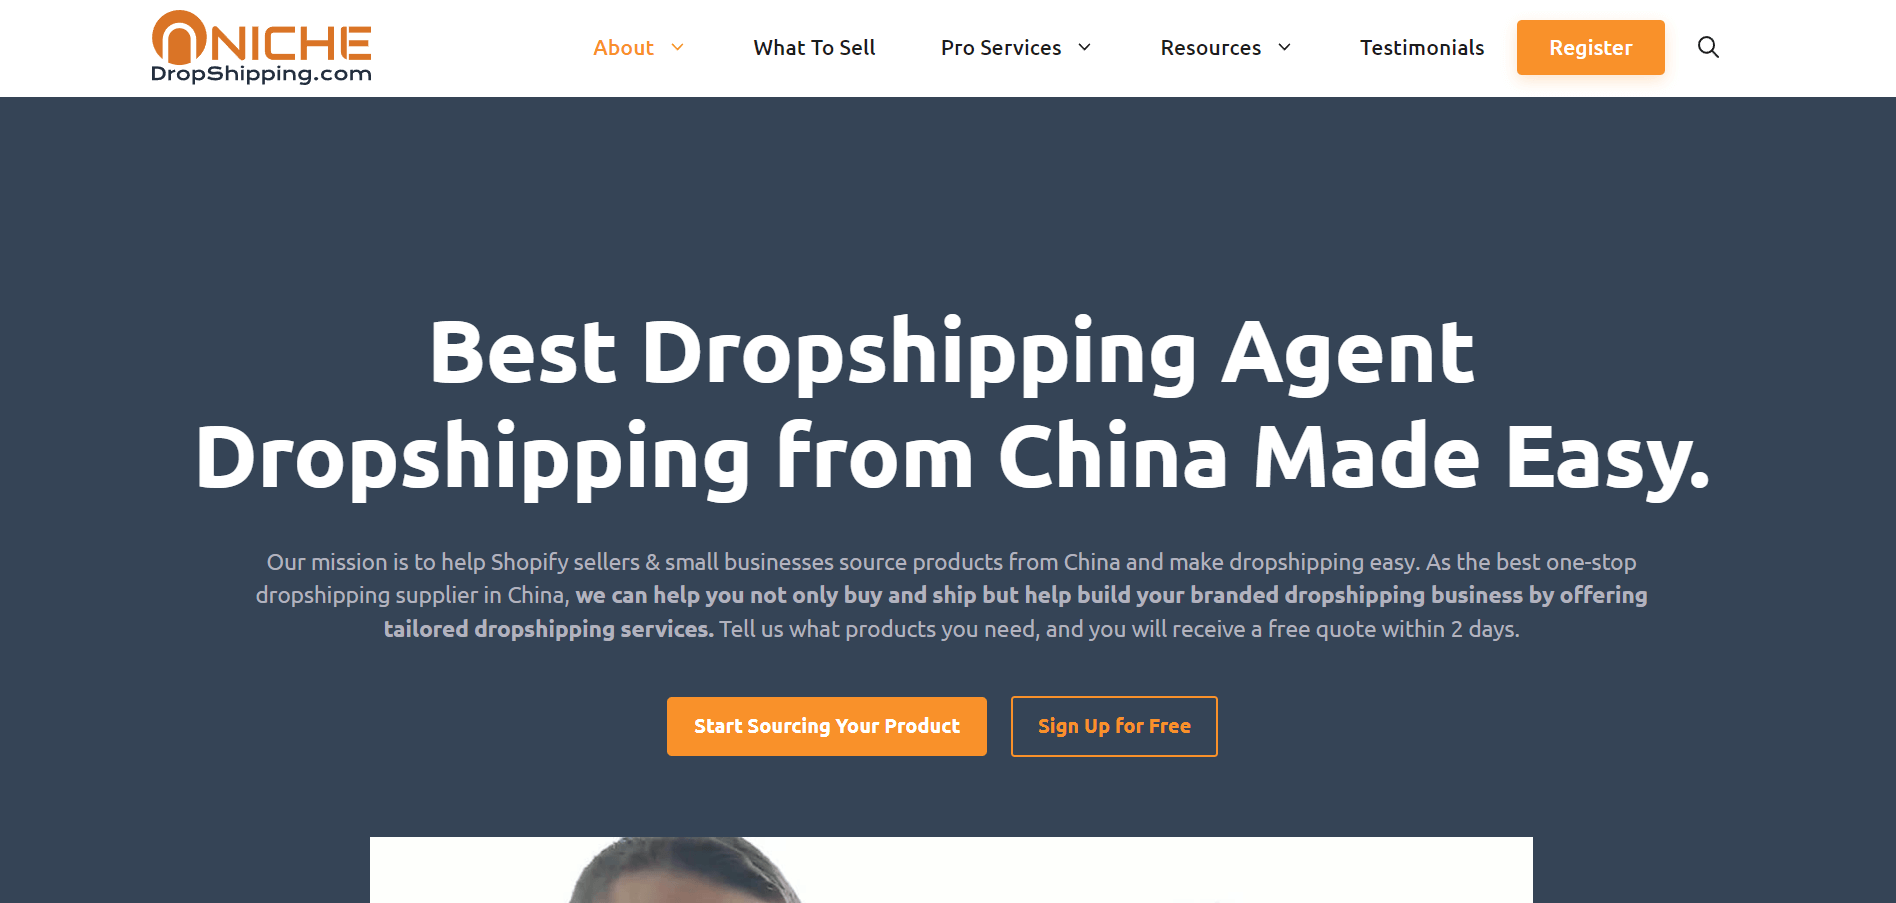 NicheDropshipping shopify dropshipping suppliers